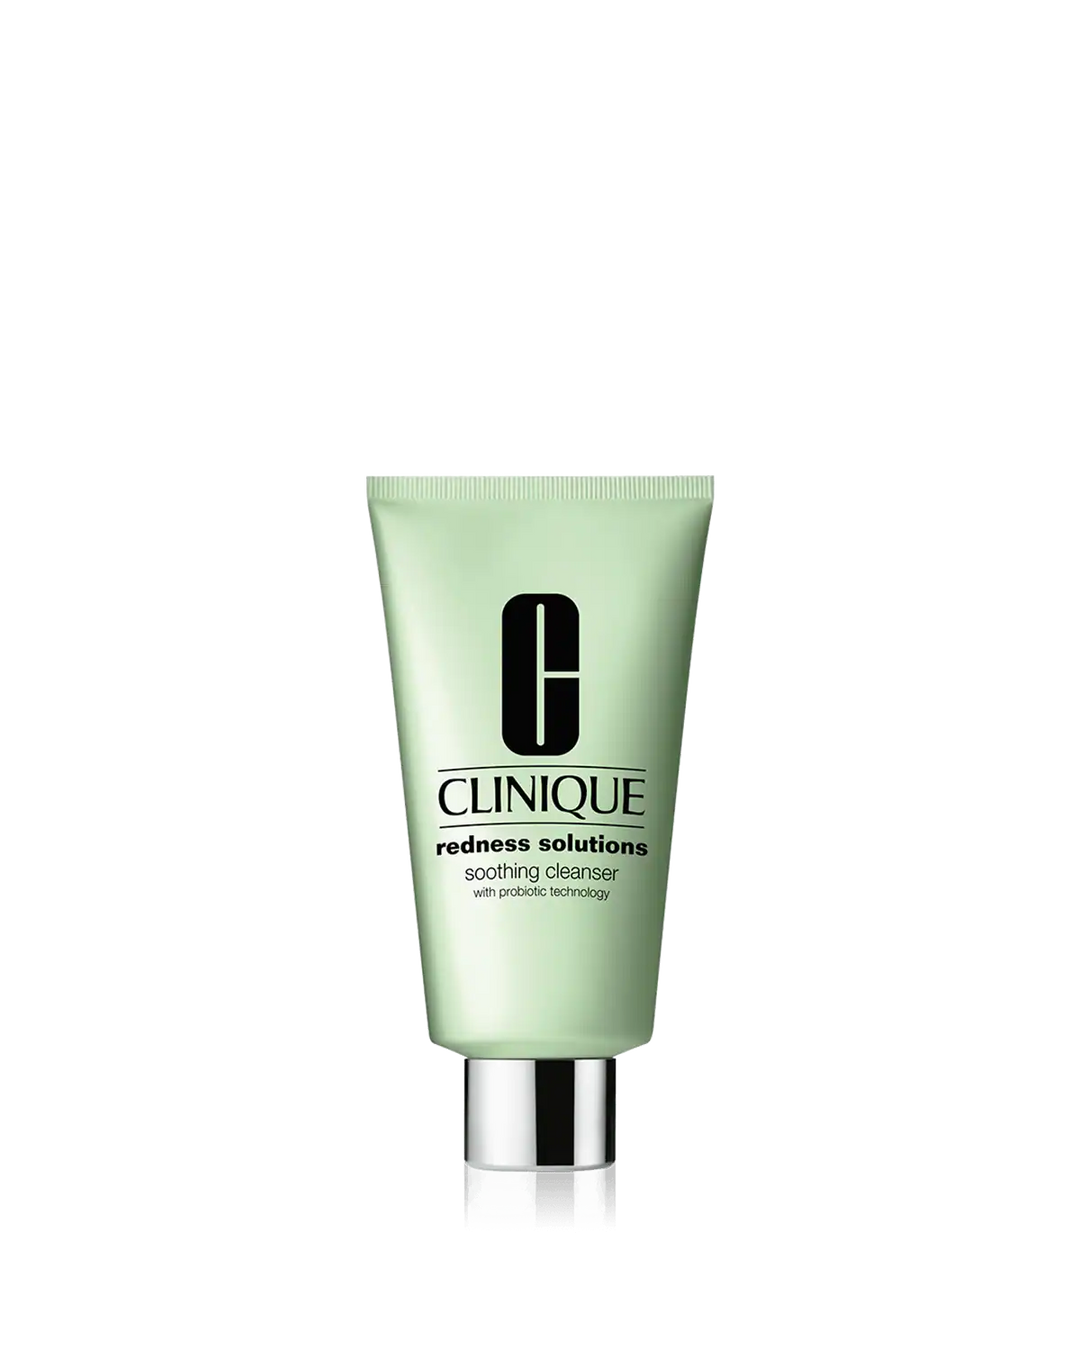 Shop The Latest Collection Of Clinique Redness Solutions Soothing Cleanser With Probiotic Technology In Lebanon